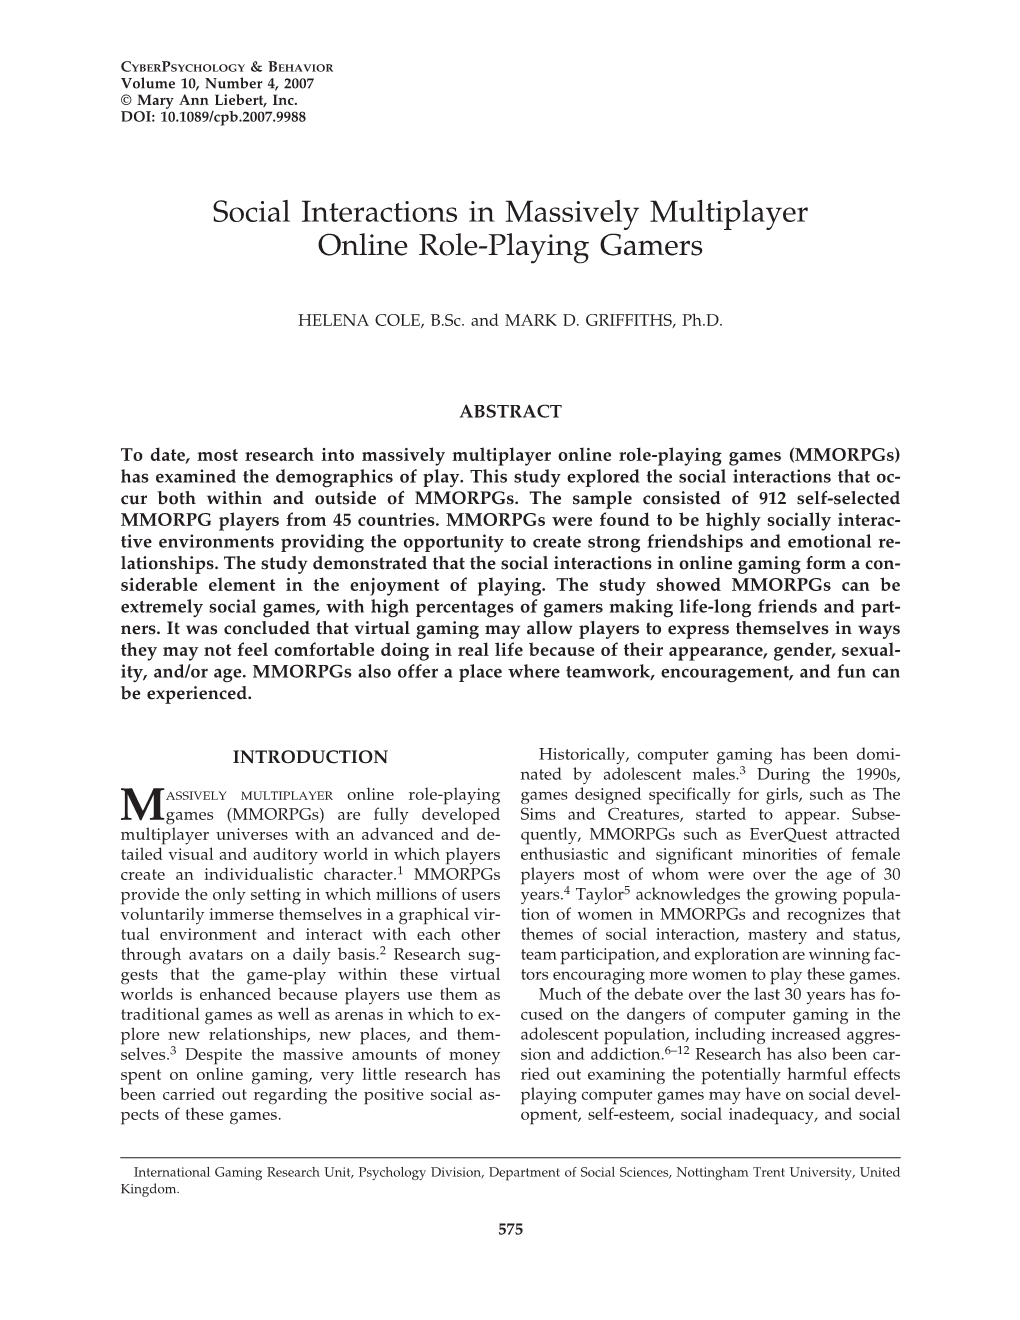 Social Interactions in Massively Multiplayer Online Role-Playing Gamers